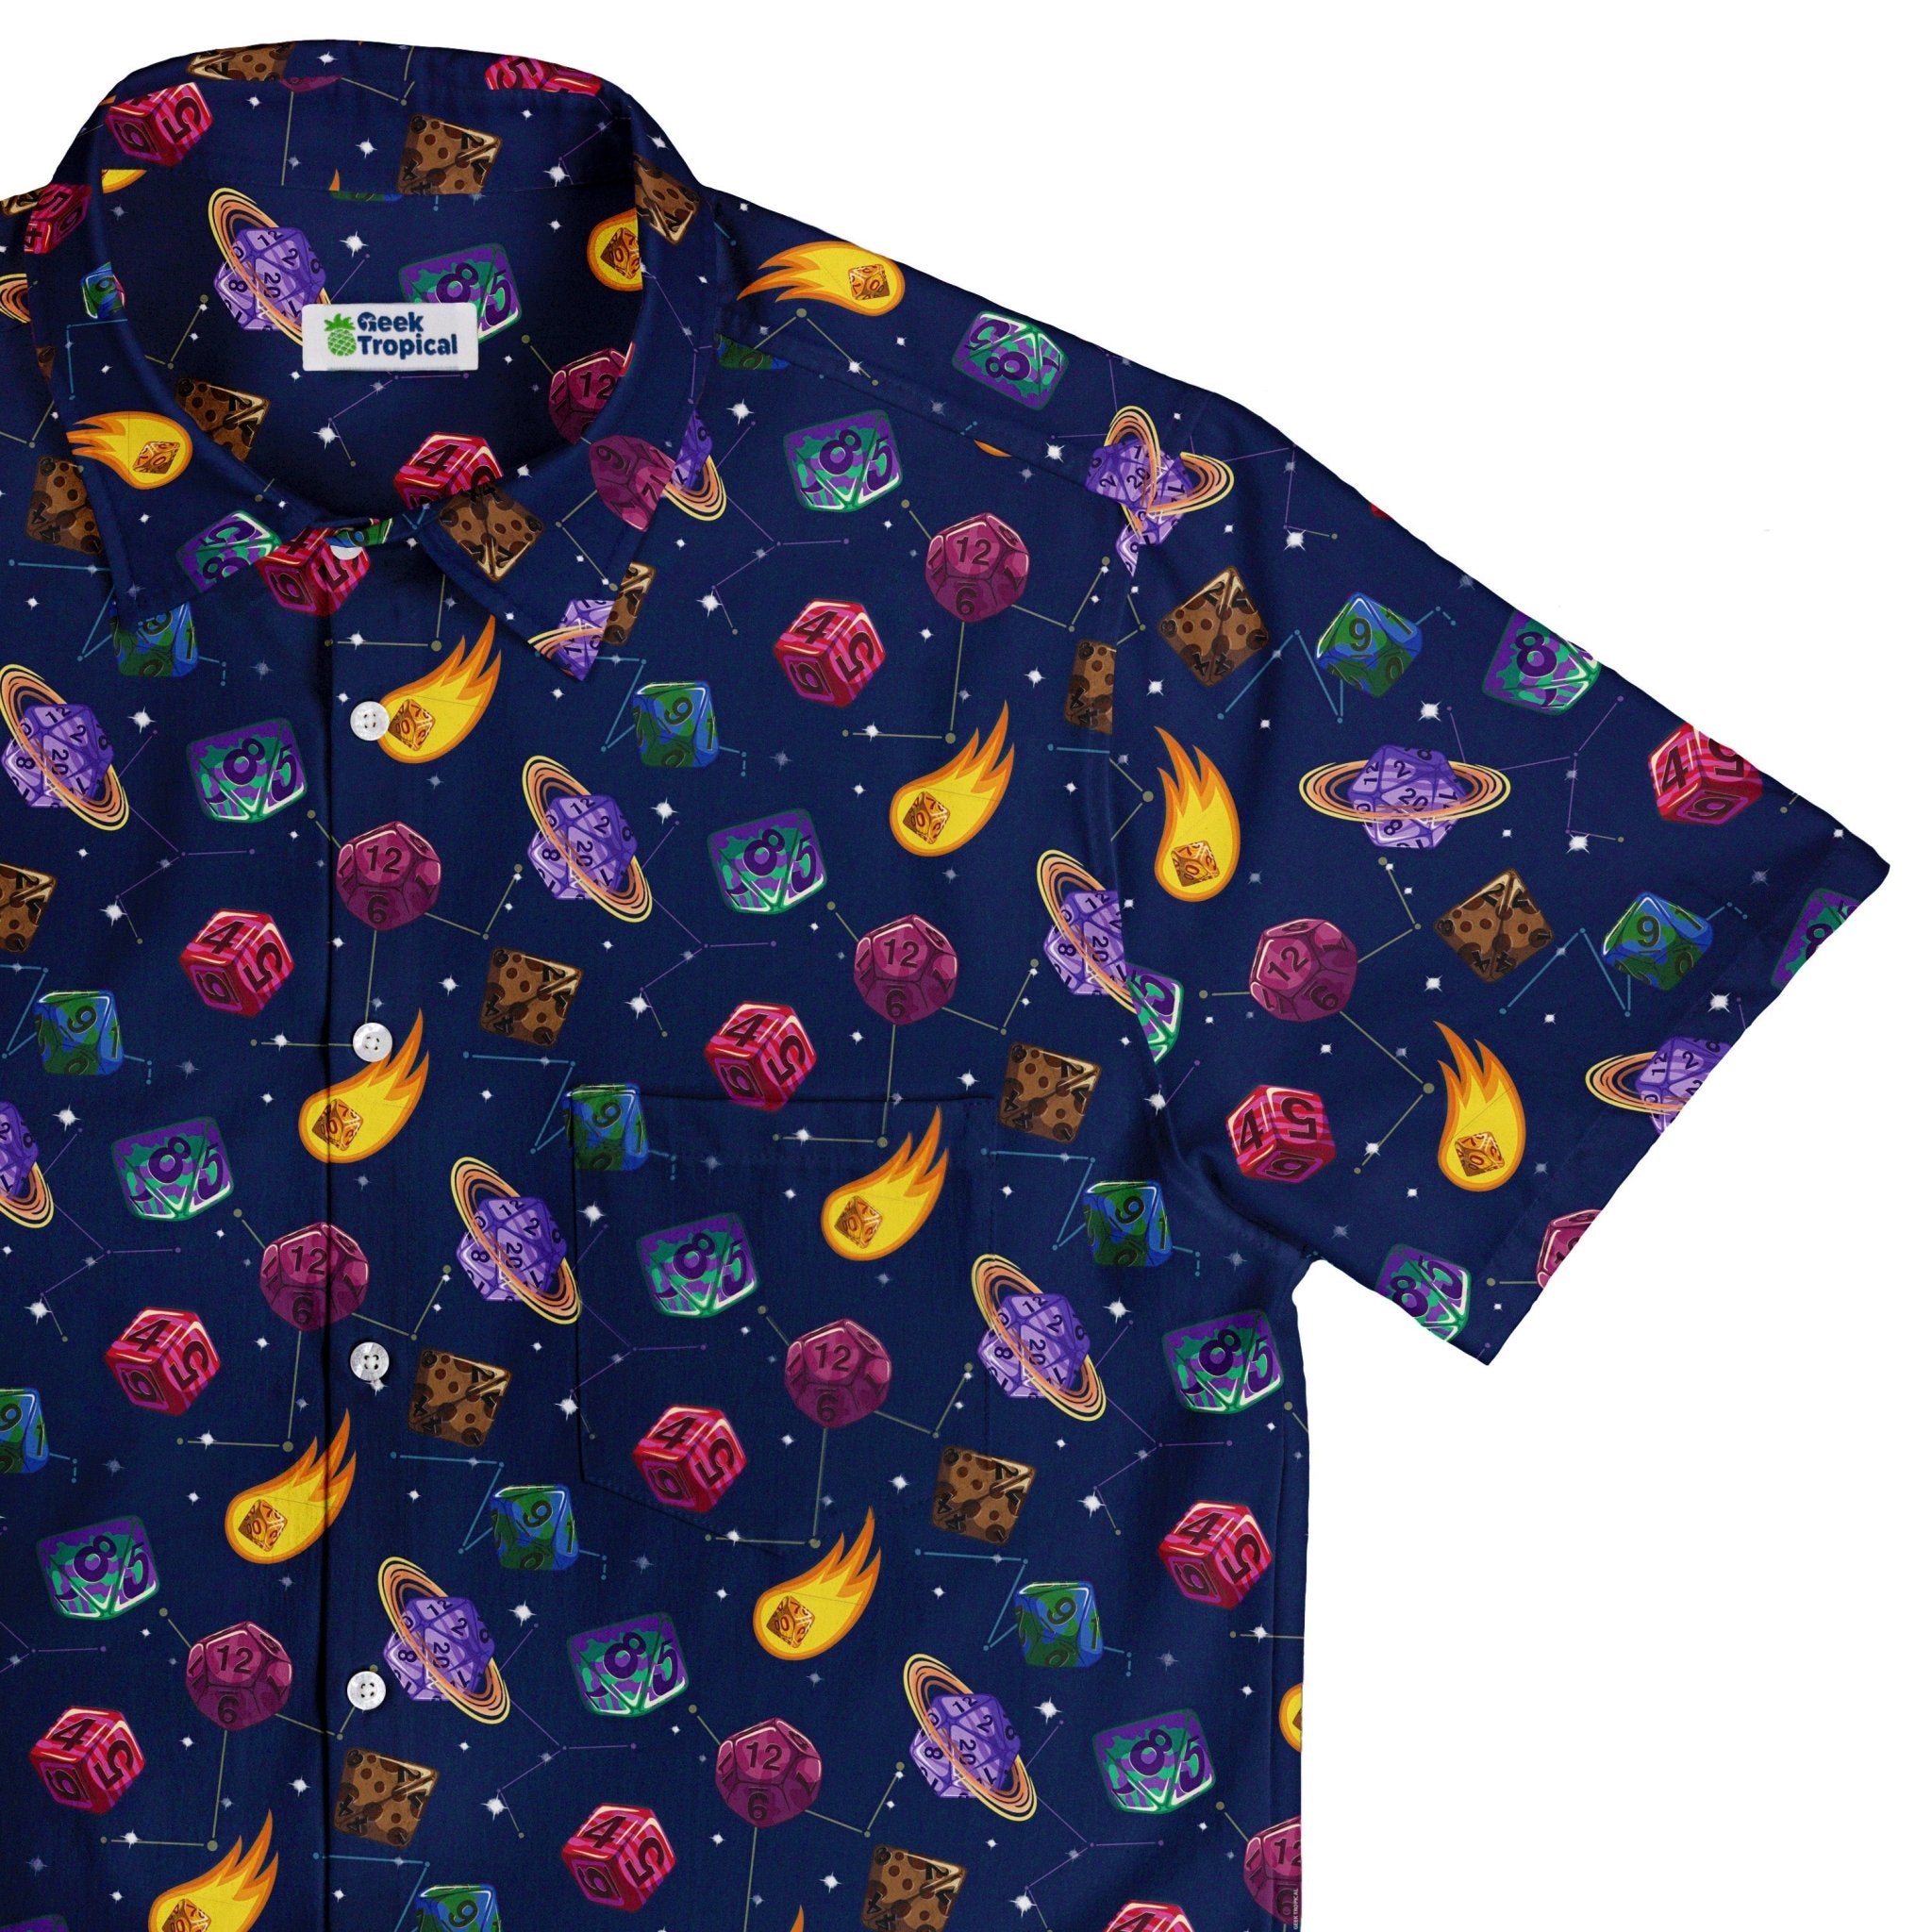 Space DND Dice Planets Button Up Shirt - adult sizing - Design by Carla Morrow - dnd & rpg print